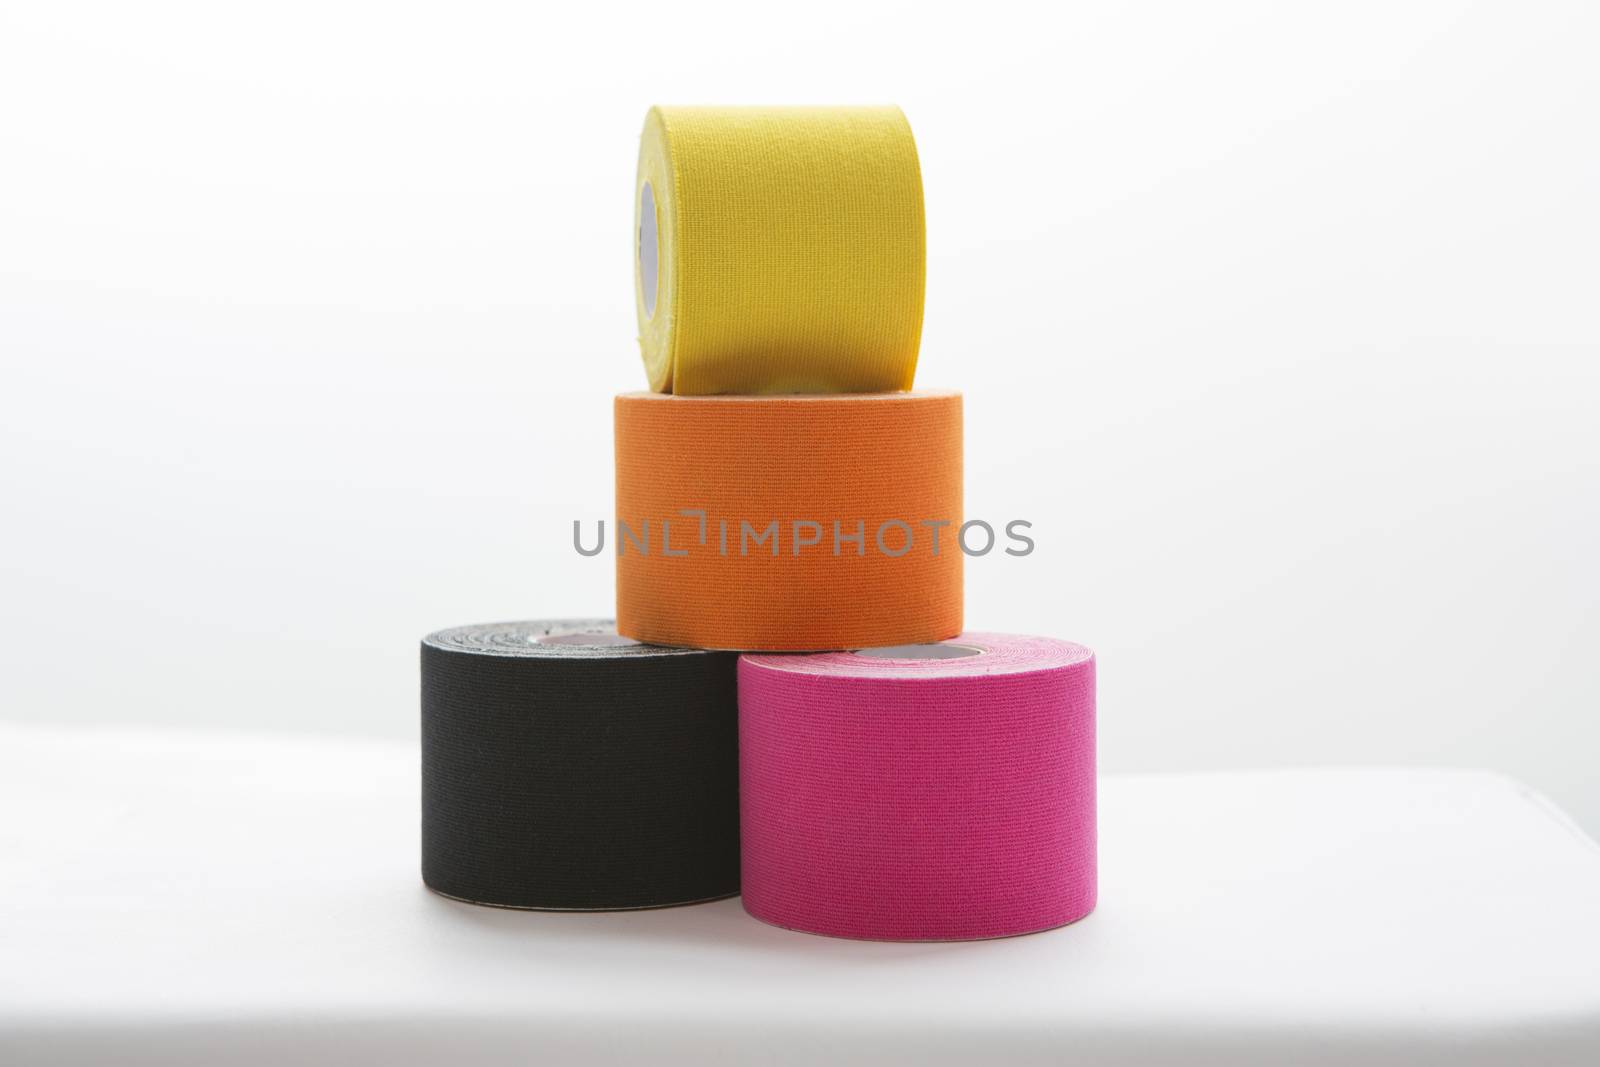 four physiotheraphy belts, black, pink, orange and yellow